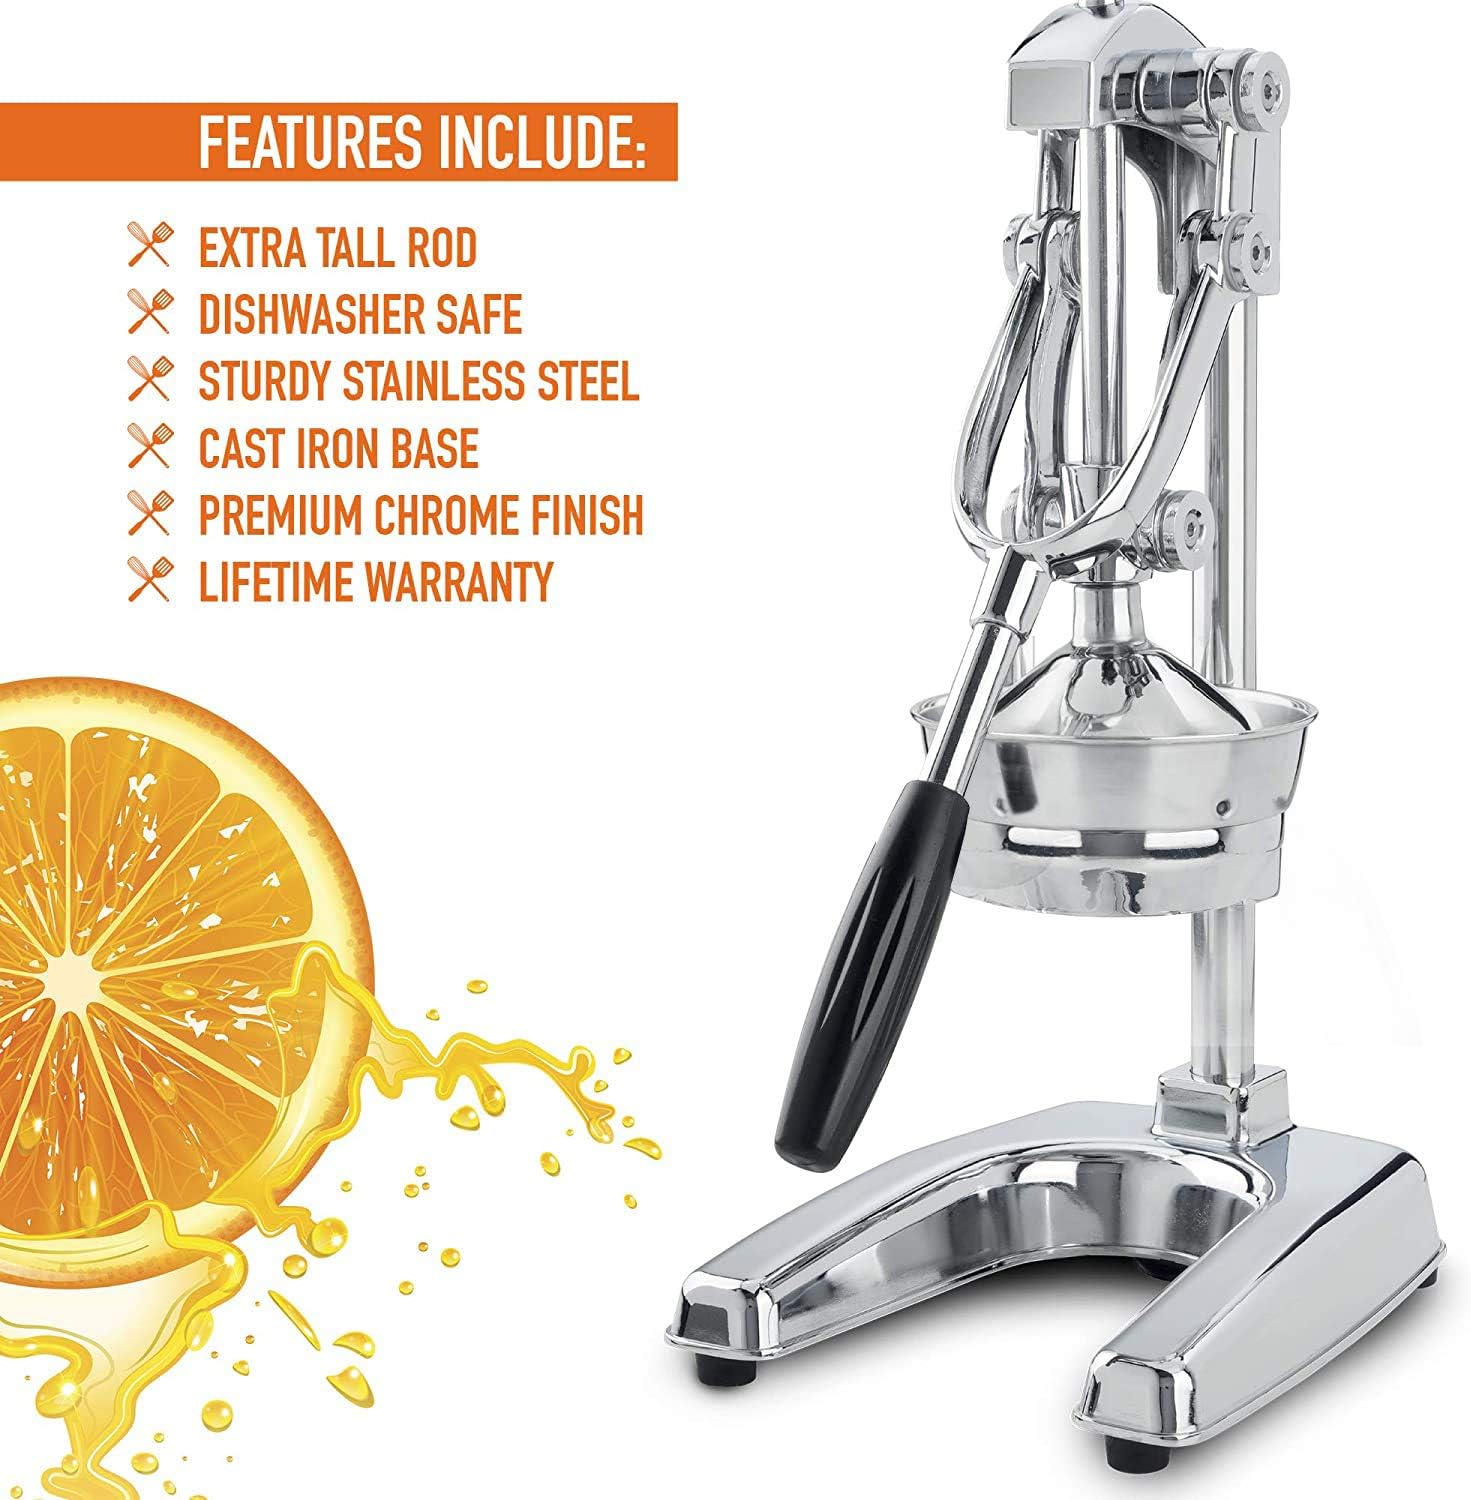 Zulay Kitchen Cast-Iron Orange Juice Squeezer - Heavy-Duty, Easy-to-Clean,  Professional Citrus Juicer - Durable Stainless Steel Lemon Squeezer 